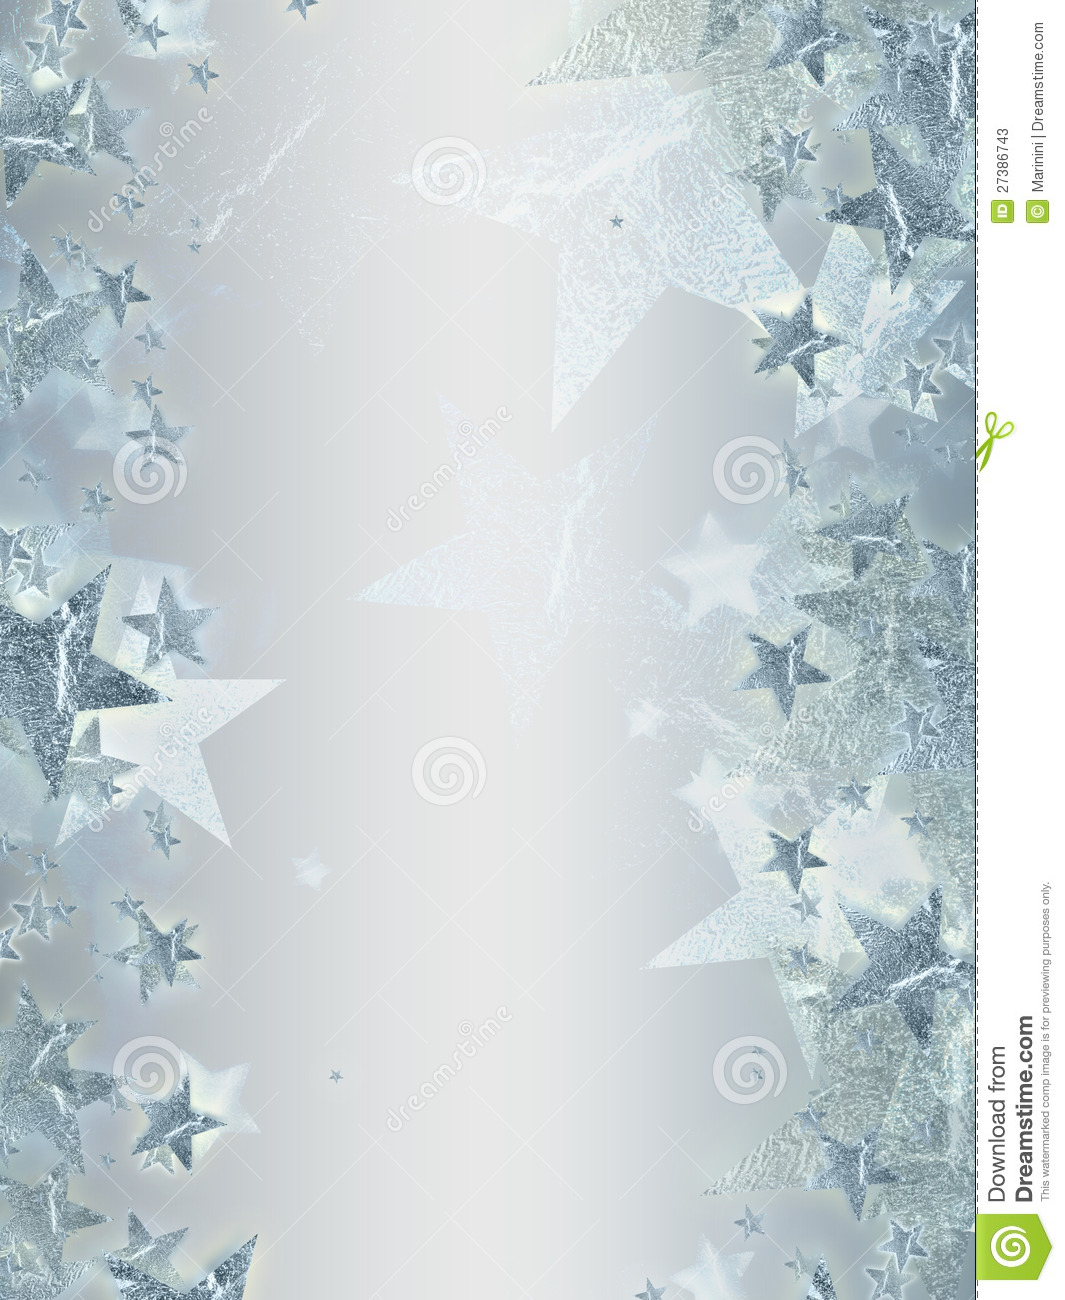 Silver Stars Background Shining Over Grey